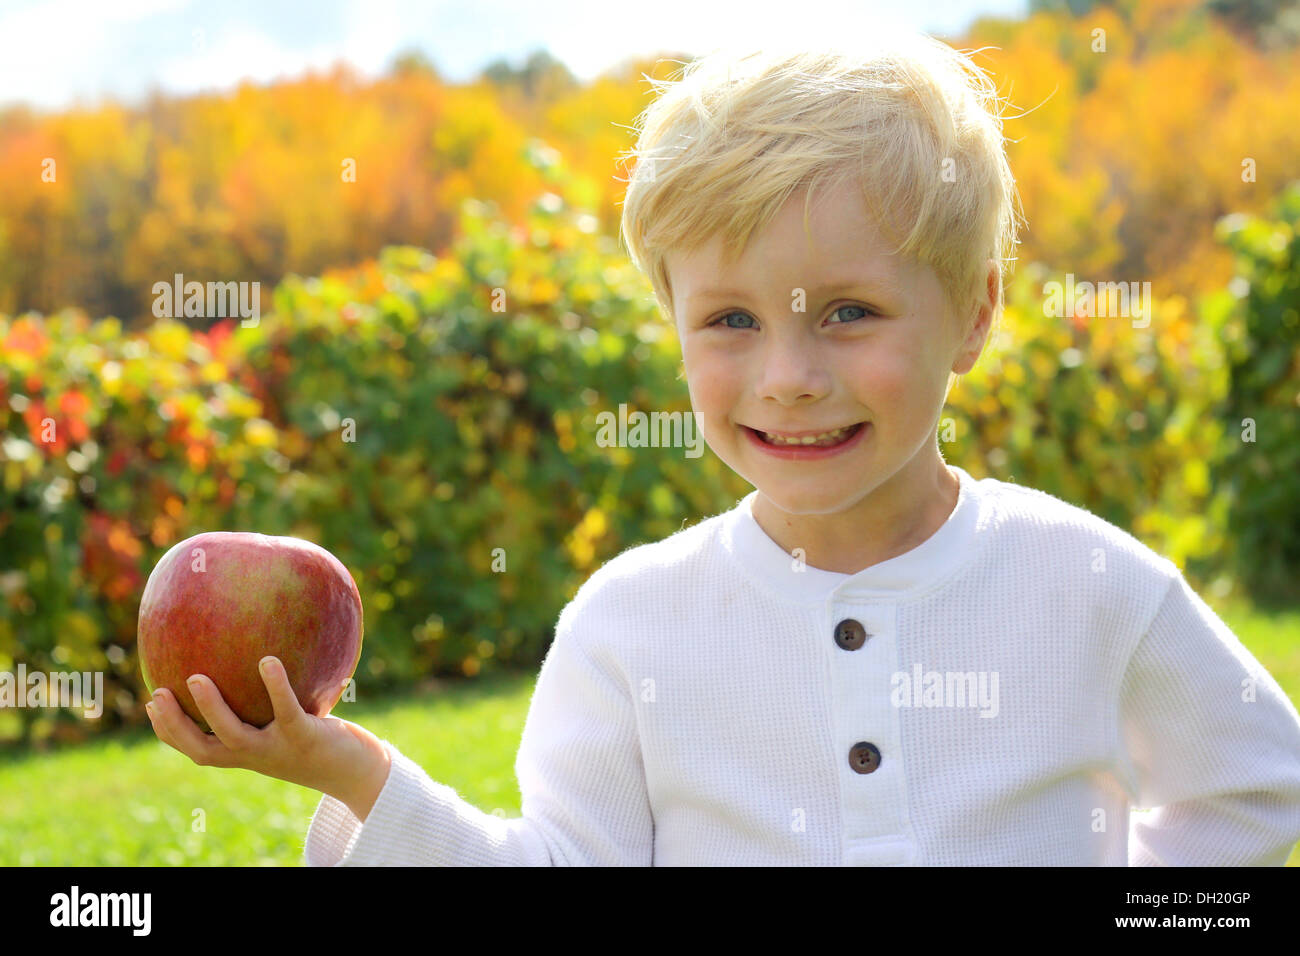 a cute, happy young child is holding a very large red apple in front of the beautiful fall colored foliage of an apple orchard Stock Photo